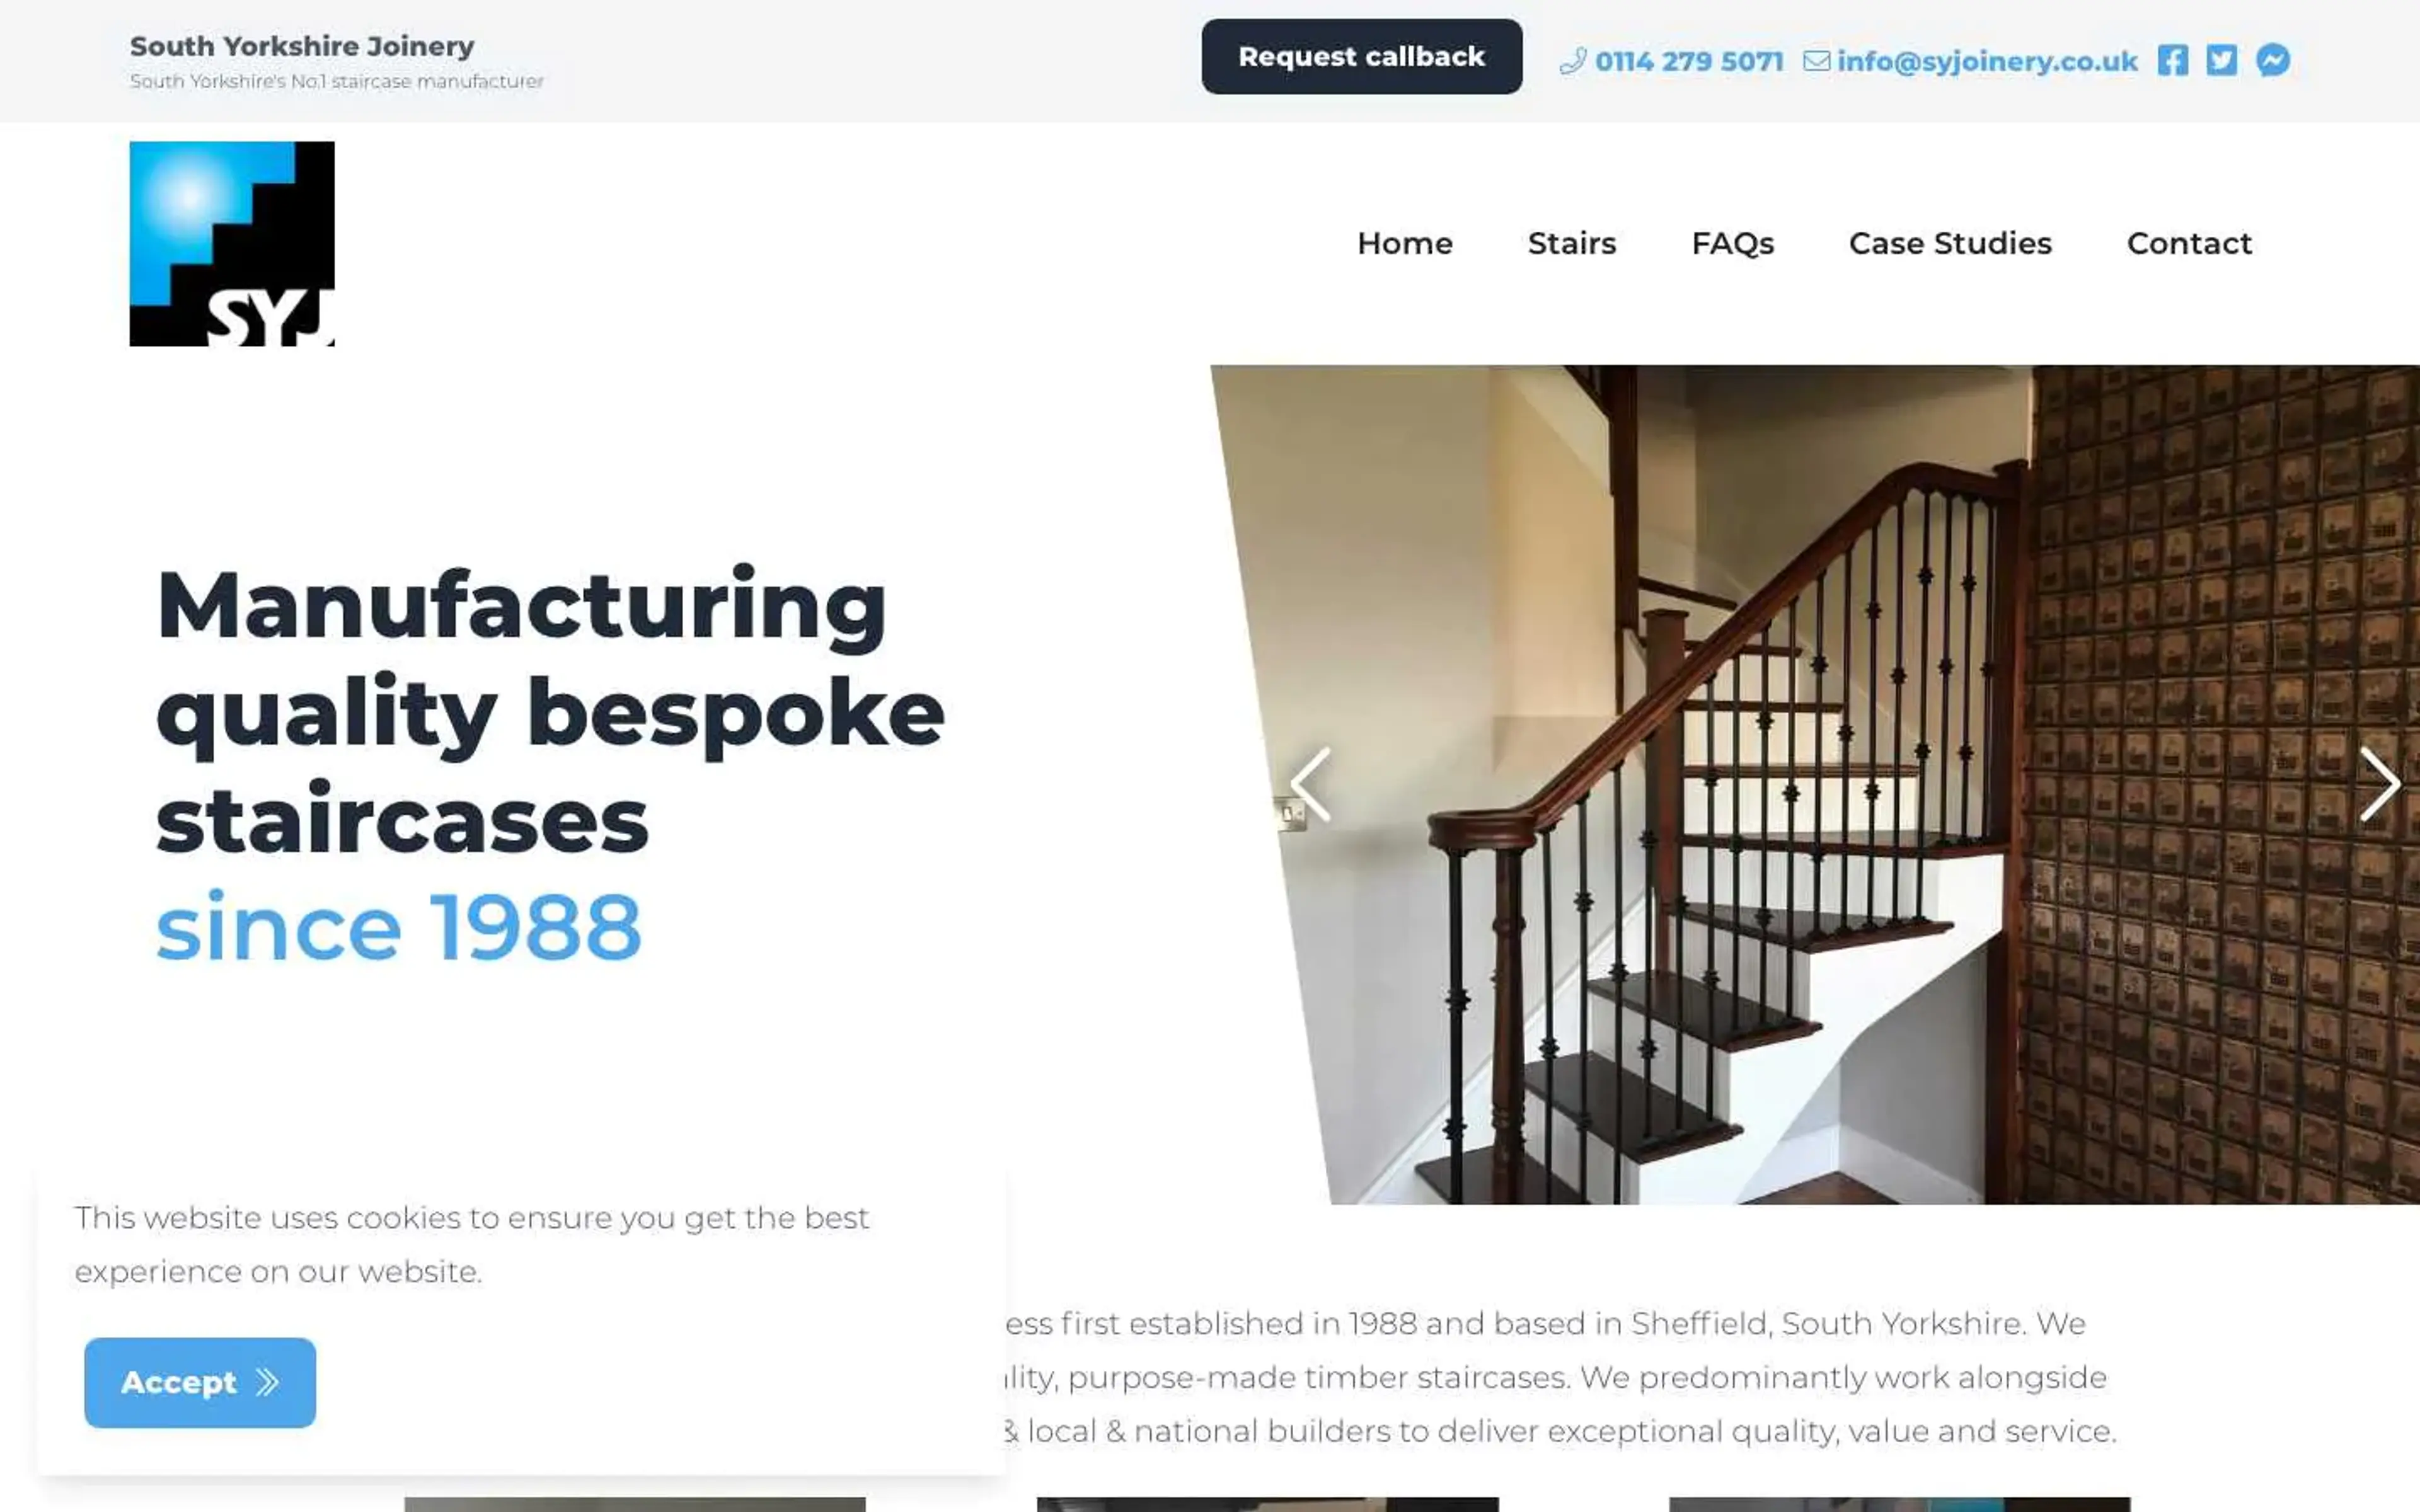 Recent project we worked on for South Yorkshire Joinery